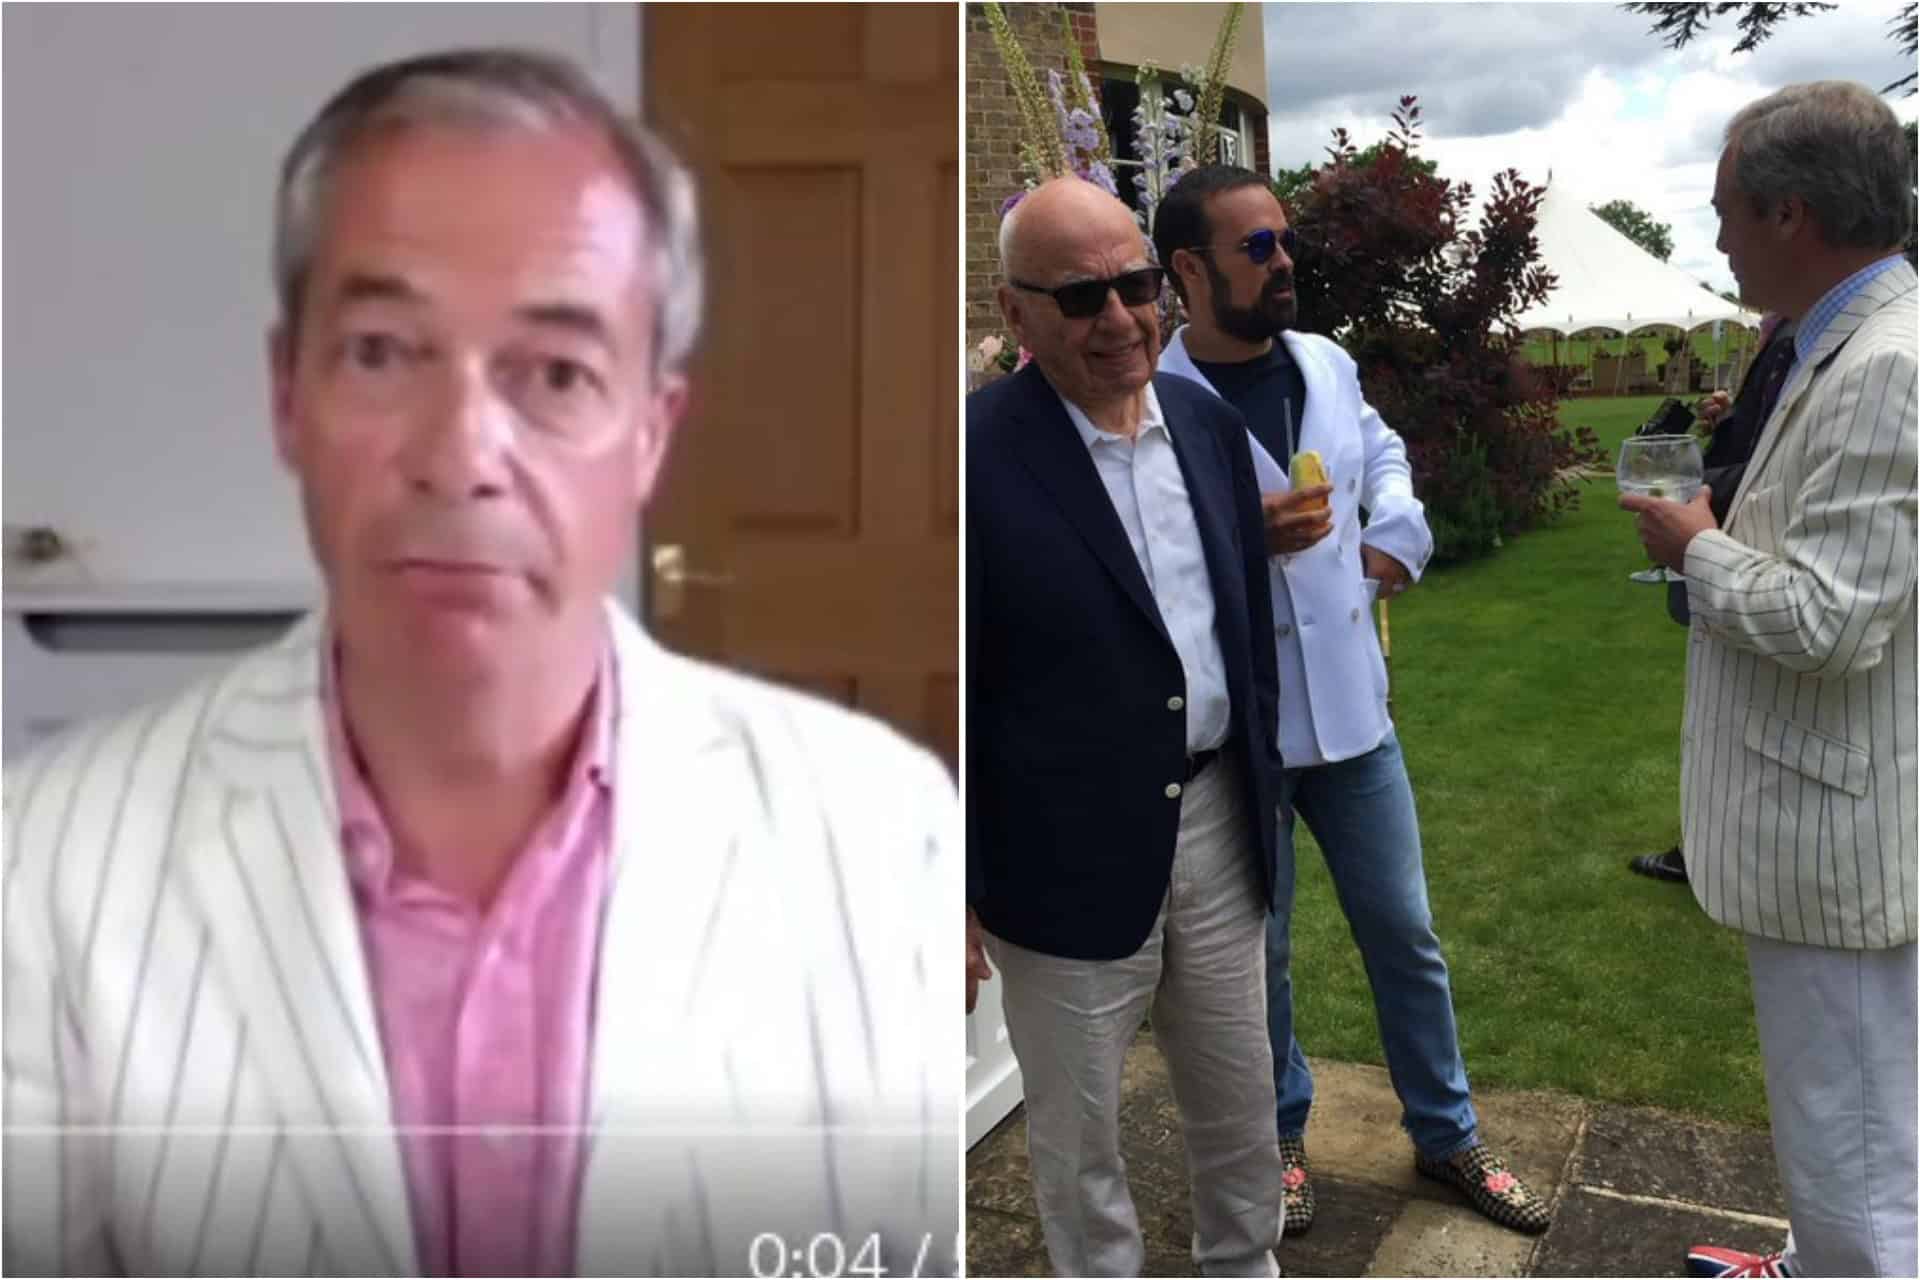 Suit jacket worn by Farage at Lebedev’s garden party comes back to haunt him